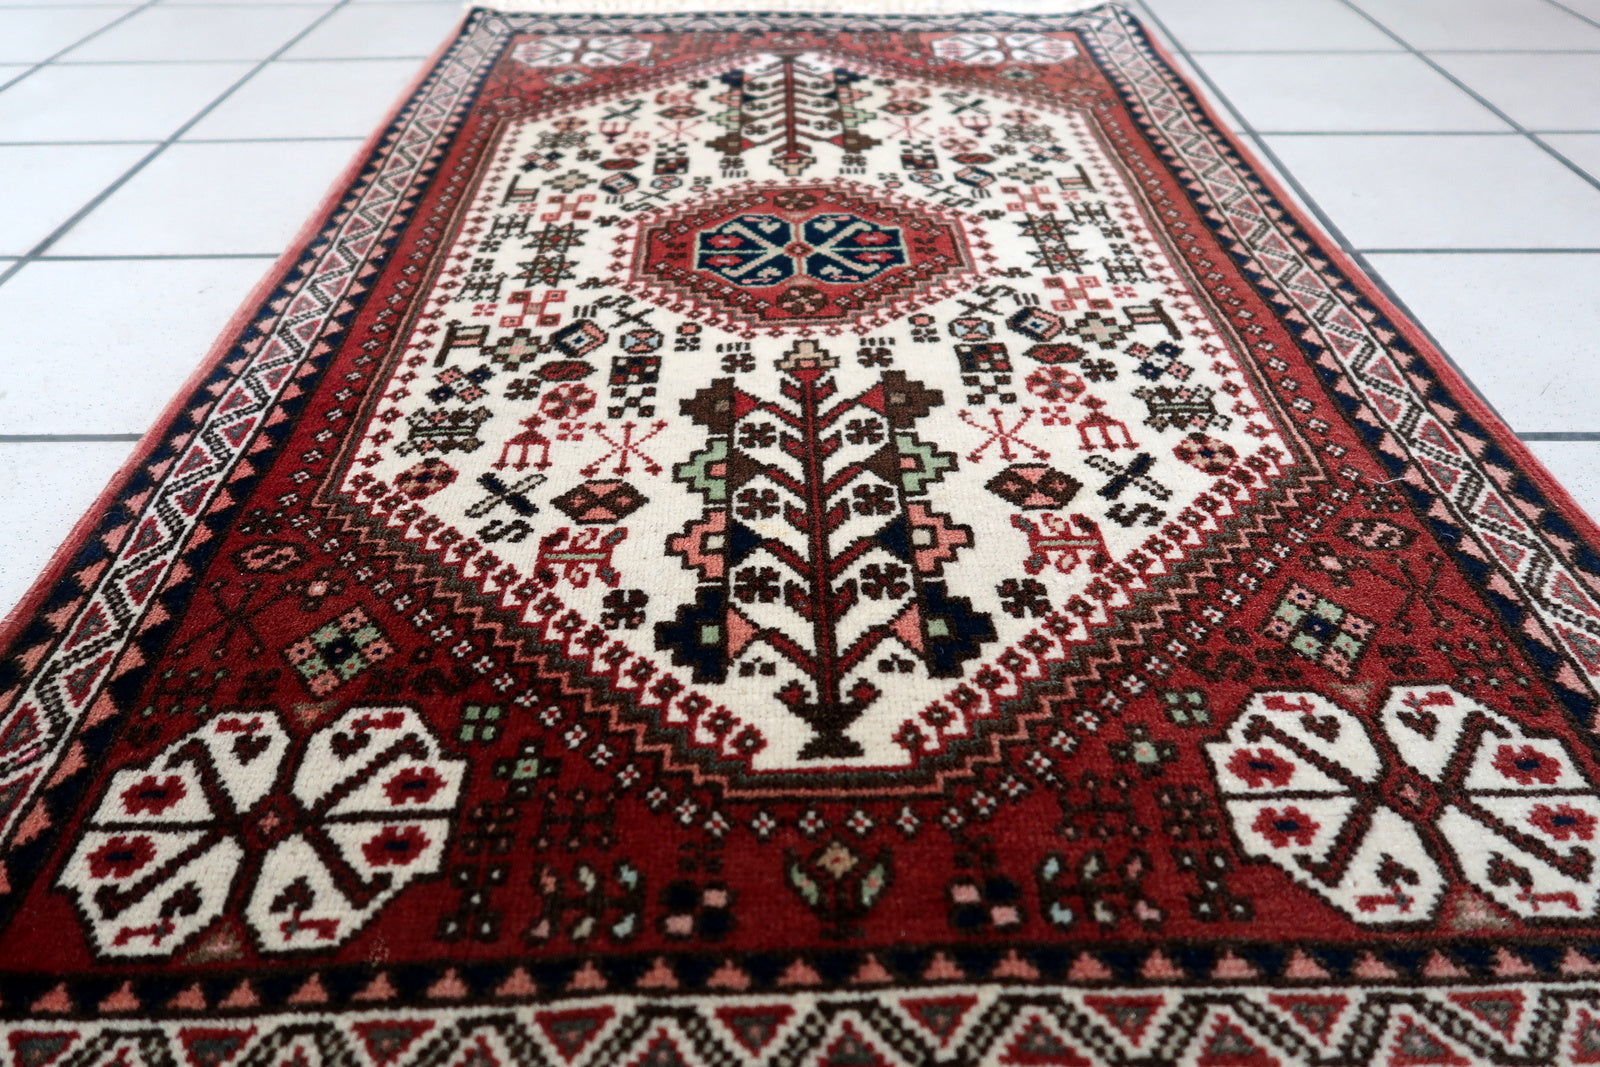 Side angle view of the rug, emphasizing its durability and well-preserved condition